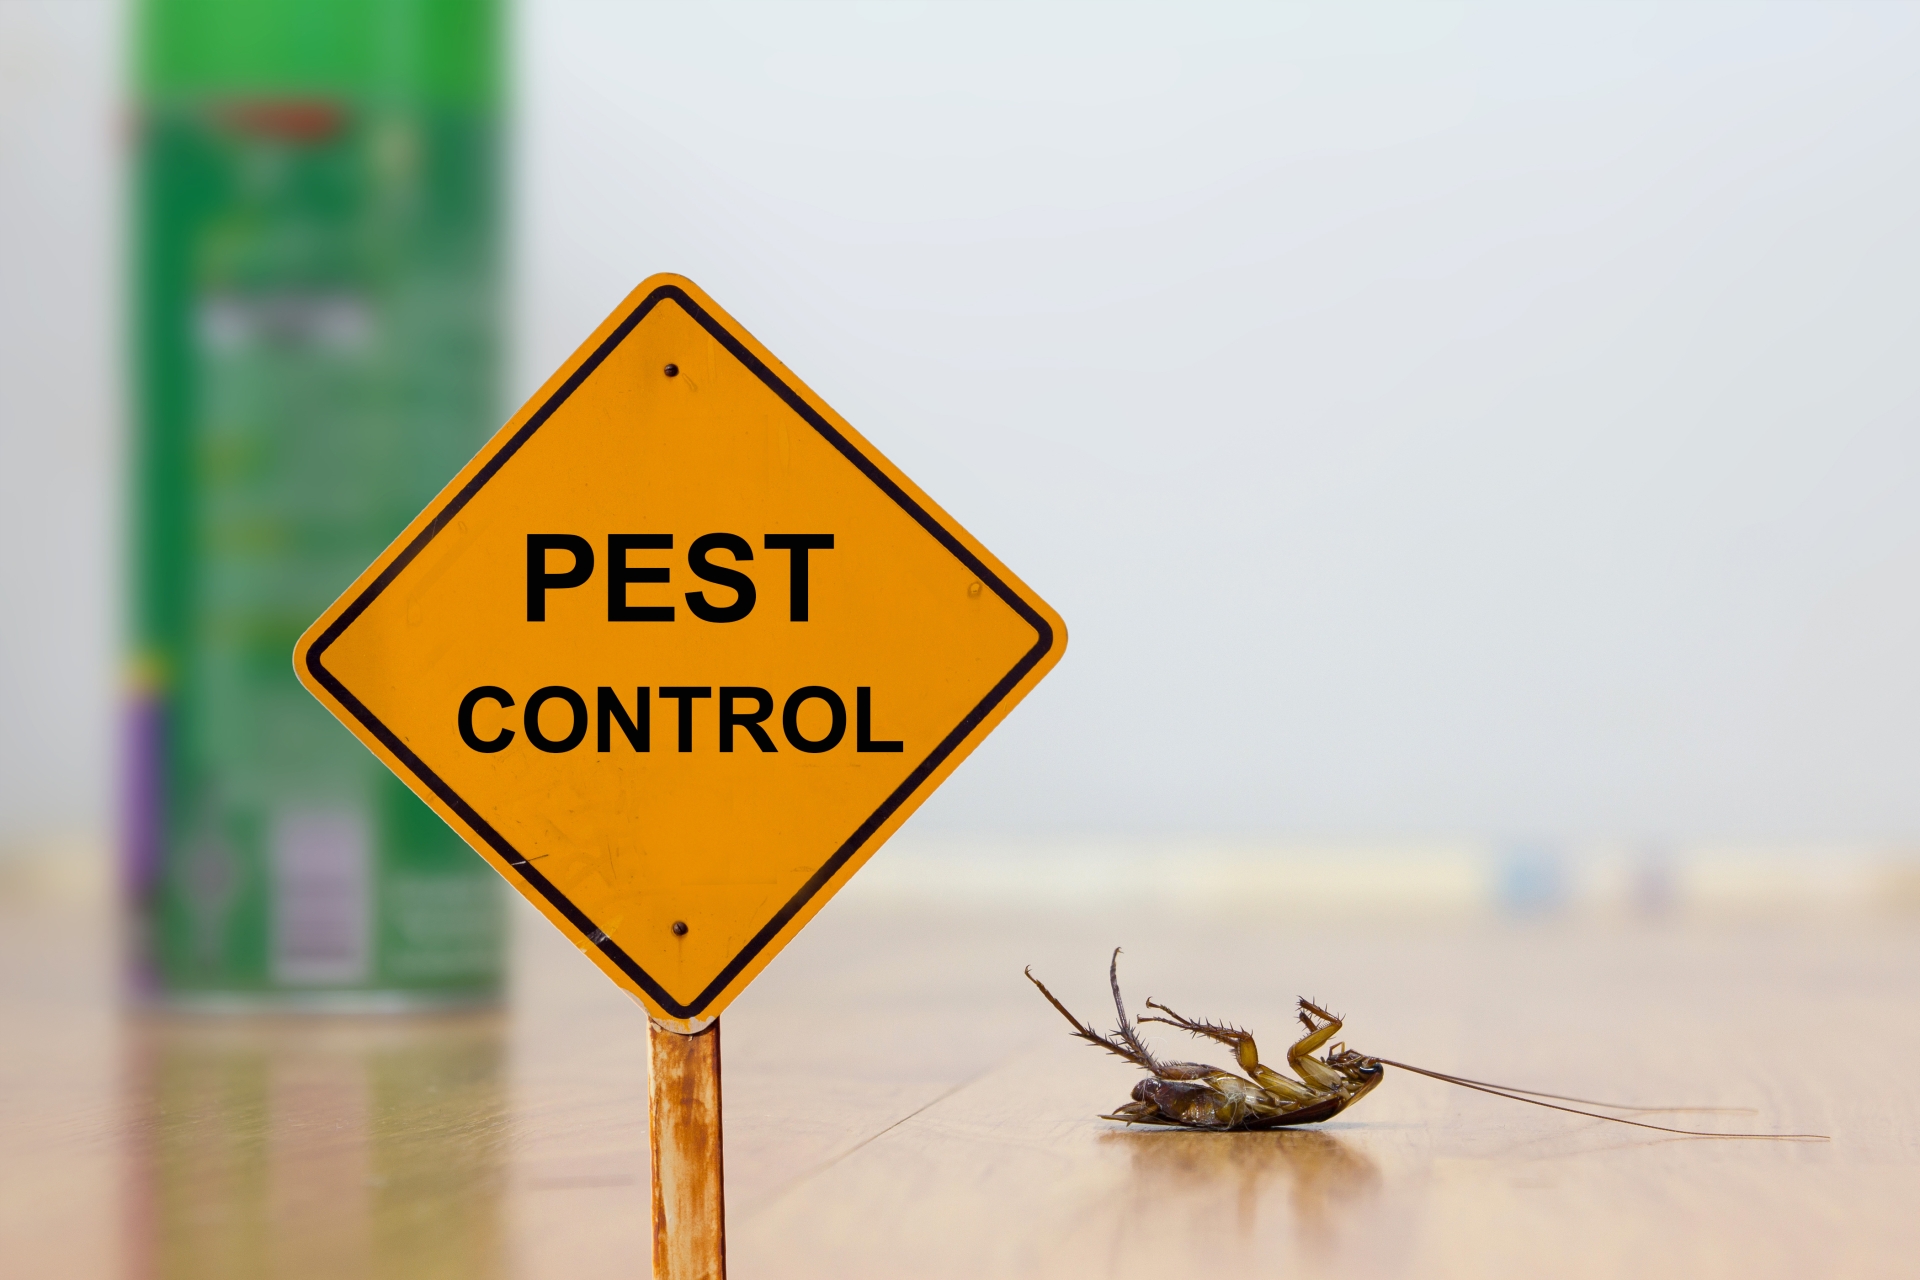 24 Hour Pest Control, Pest Control in Enfield, EN1. Call Now 020 8166 9746